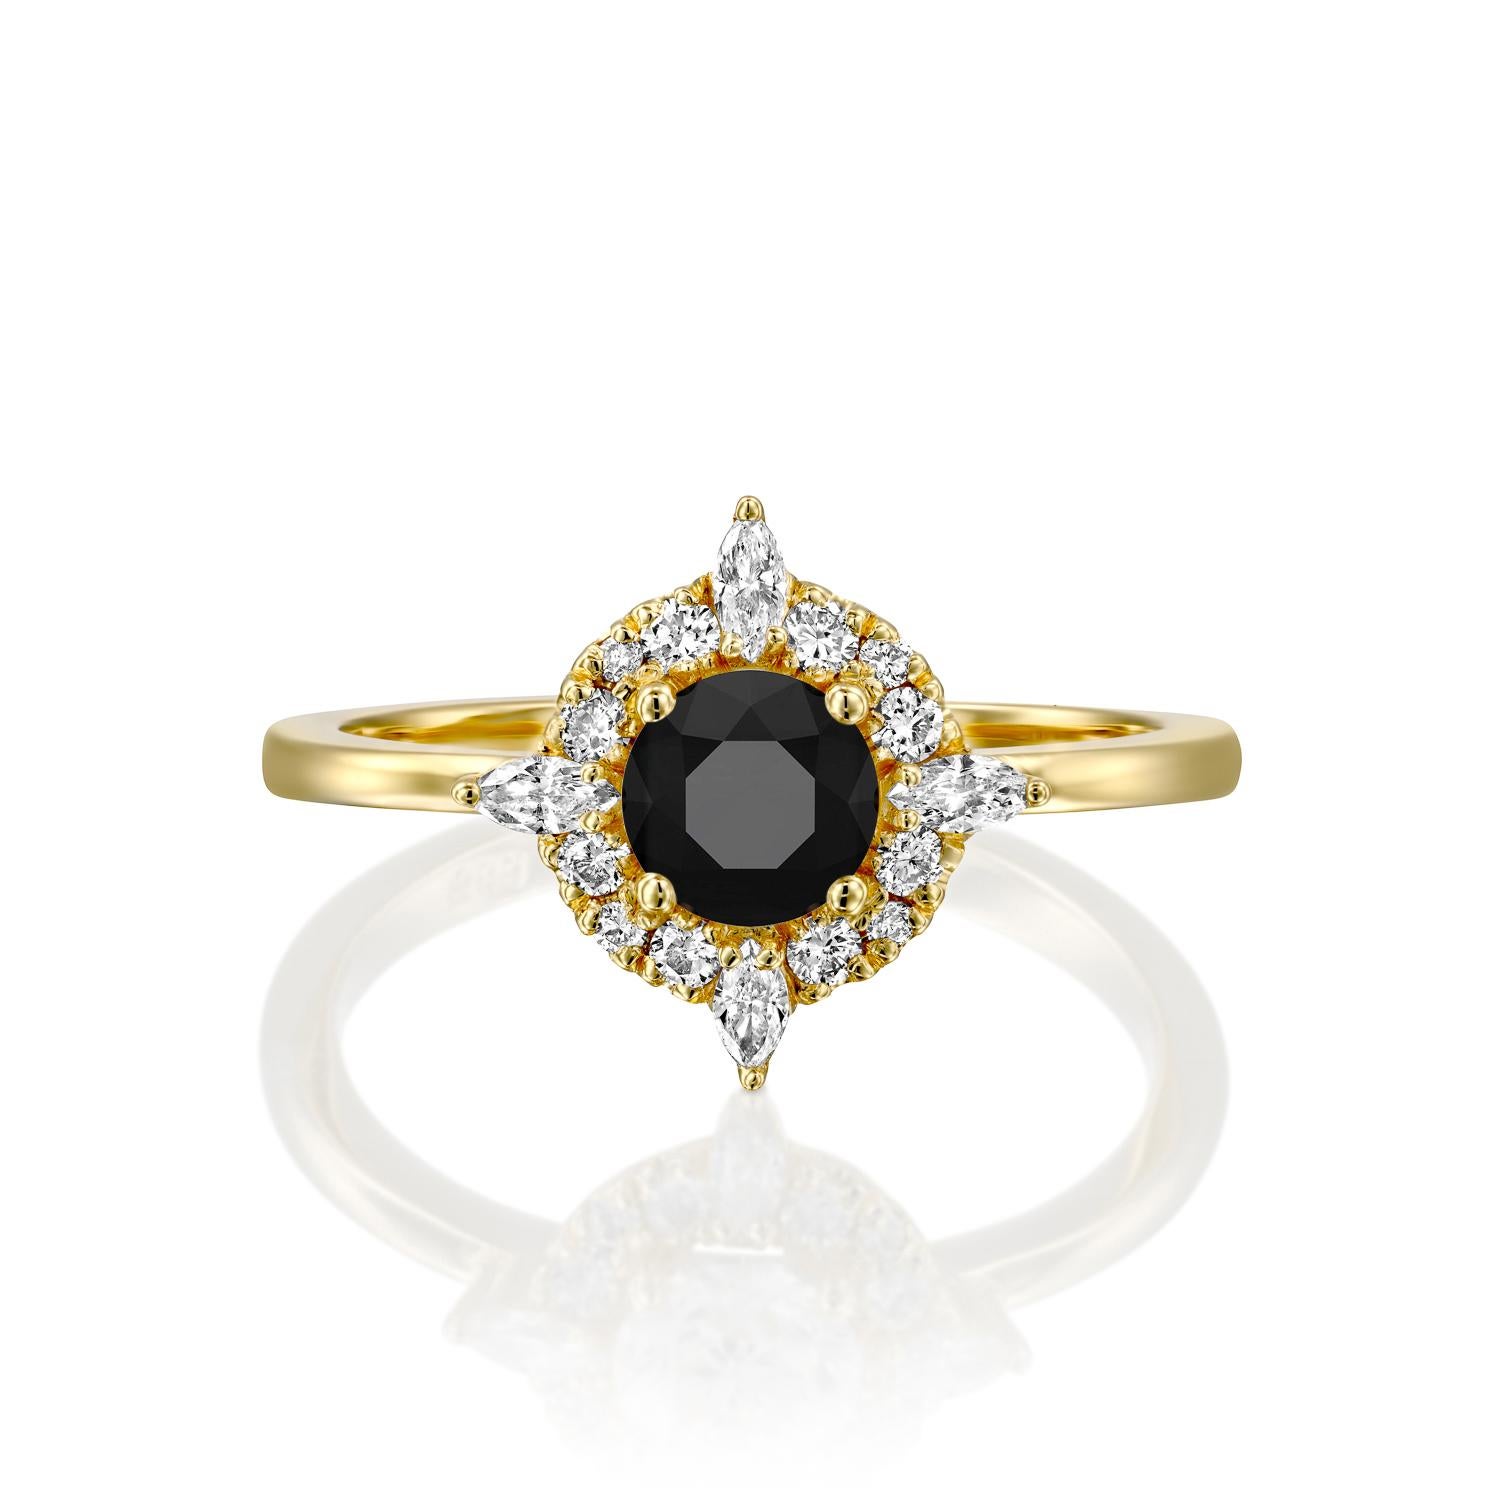 Beautiful solitaire with accents Victorian style diamond engagement ring. Center stone is natural, round shaped, AAA quality Black Diamond of 3/4 carat and it is surrounded by smaller natural round diamonds approx. 0.25 total carat weight. The total